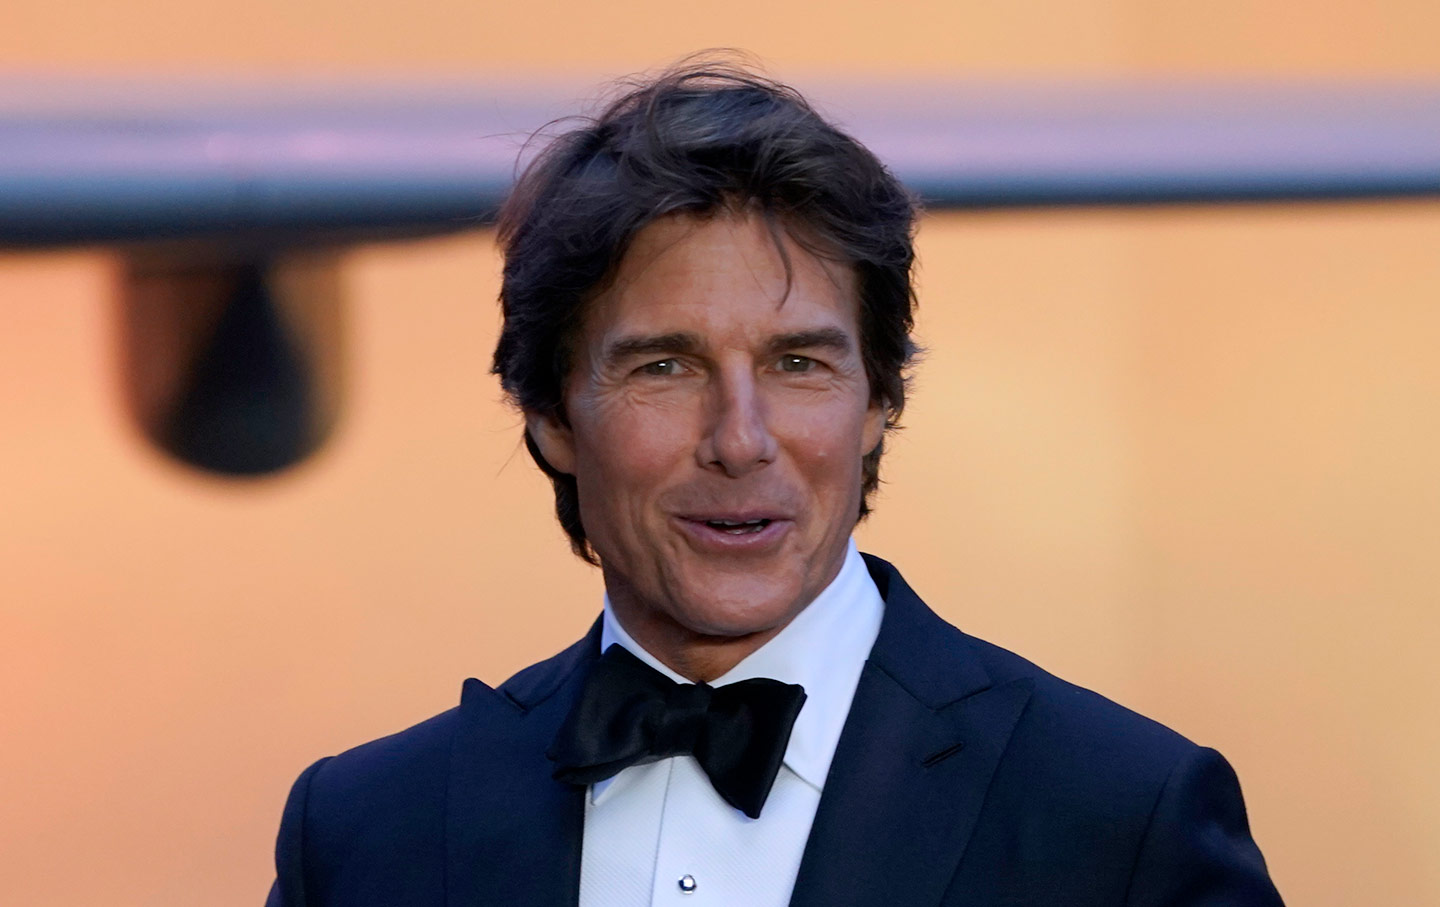 Tom Cruise poses in a navy tuxedo with black bow tie.